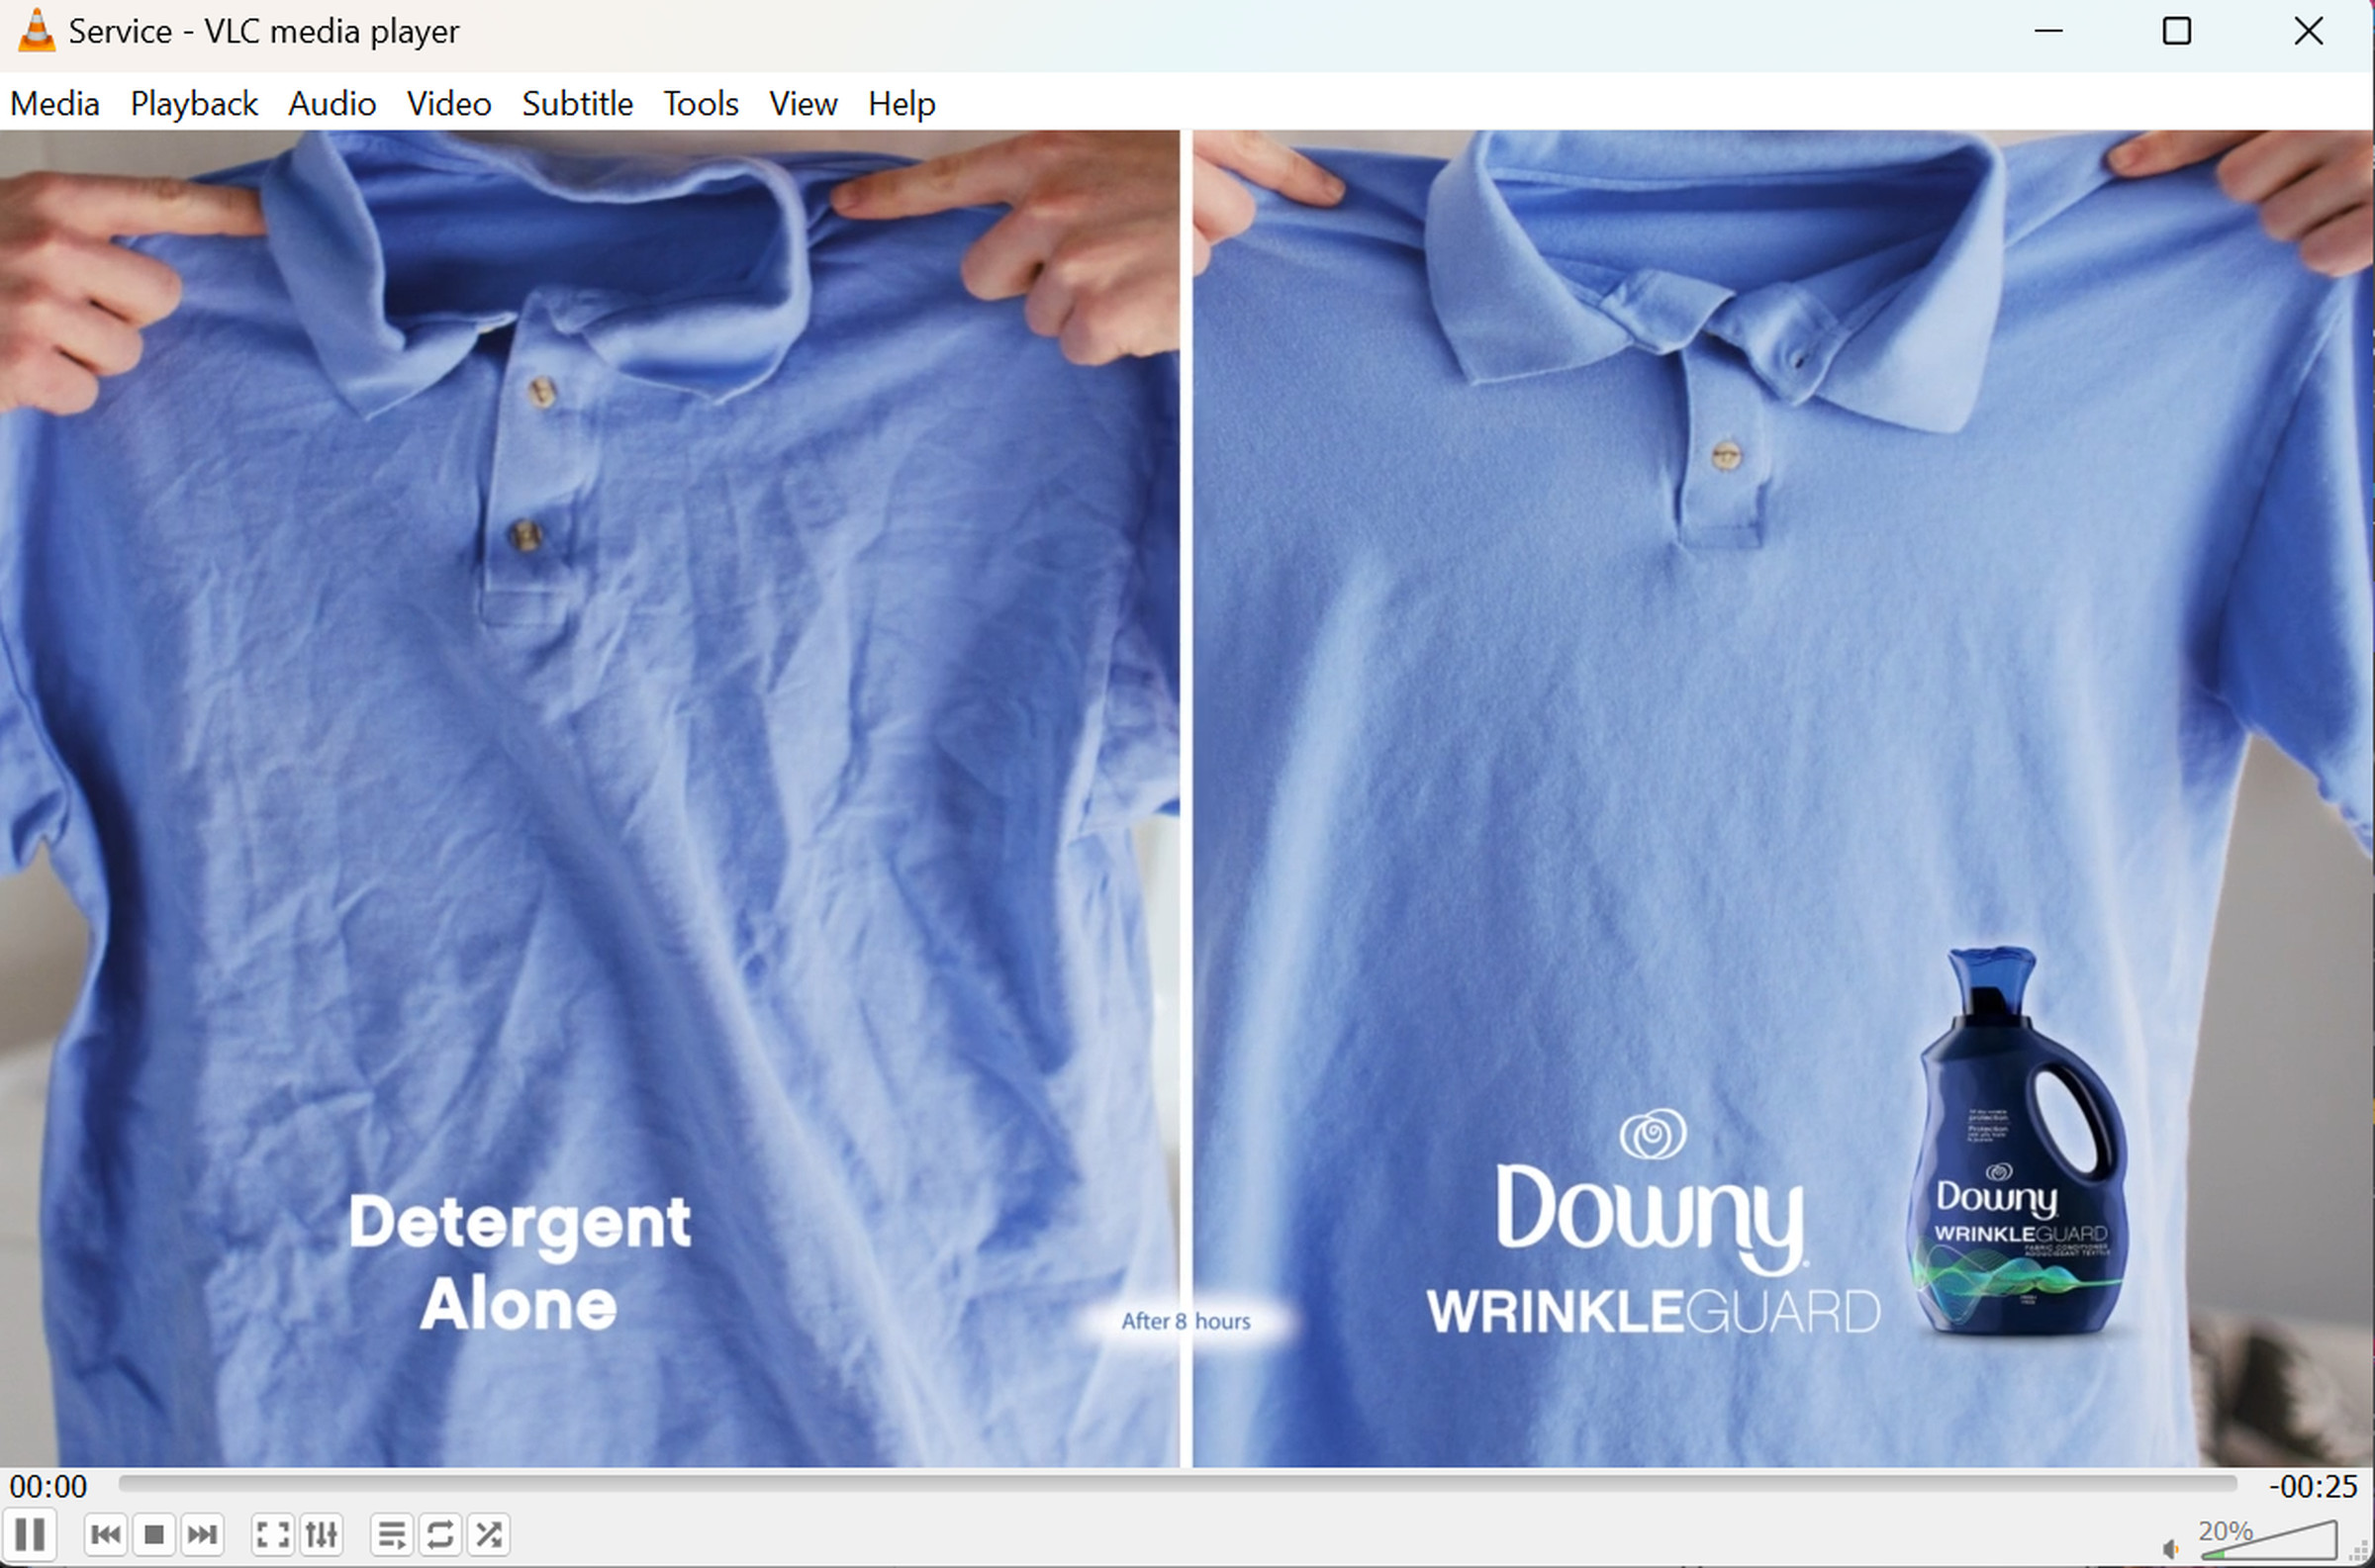 An image of a Downy ad being played in VLC.